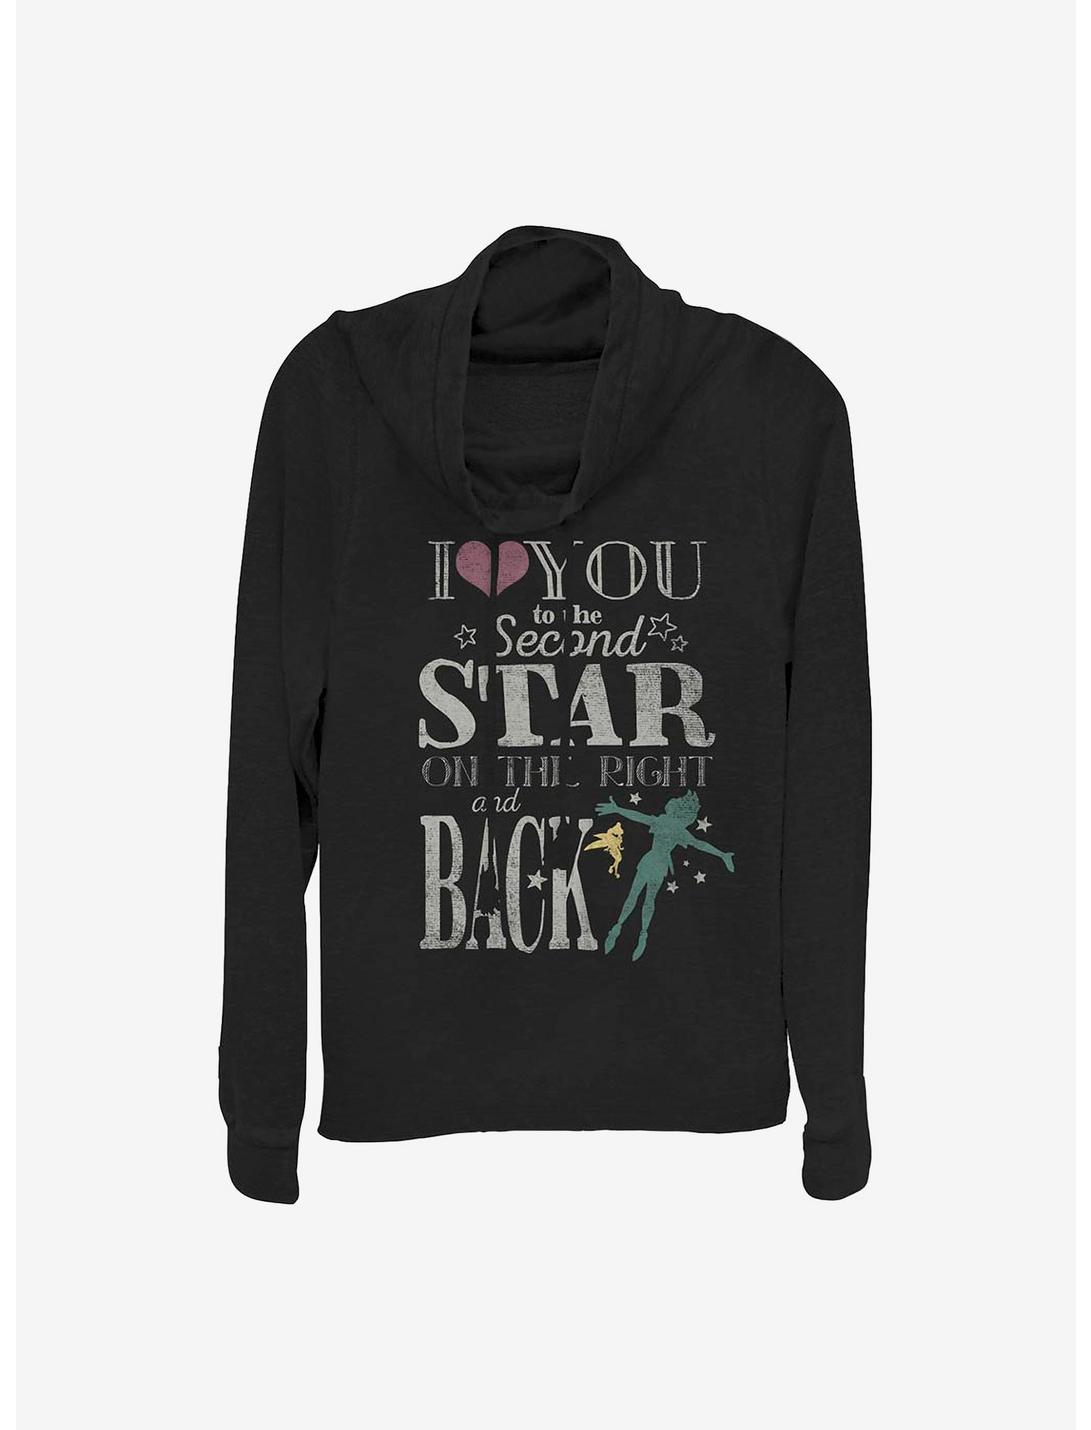 Disney Tinker Bell Love You To The Star Cowl Neck Long-Sleeve Womens Top, BLACK, hi-res